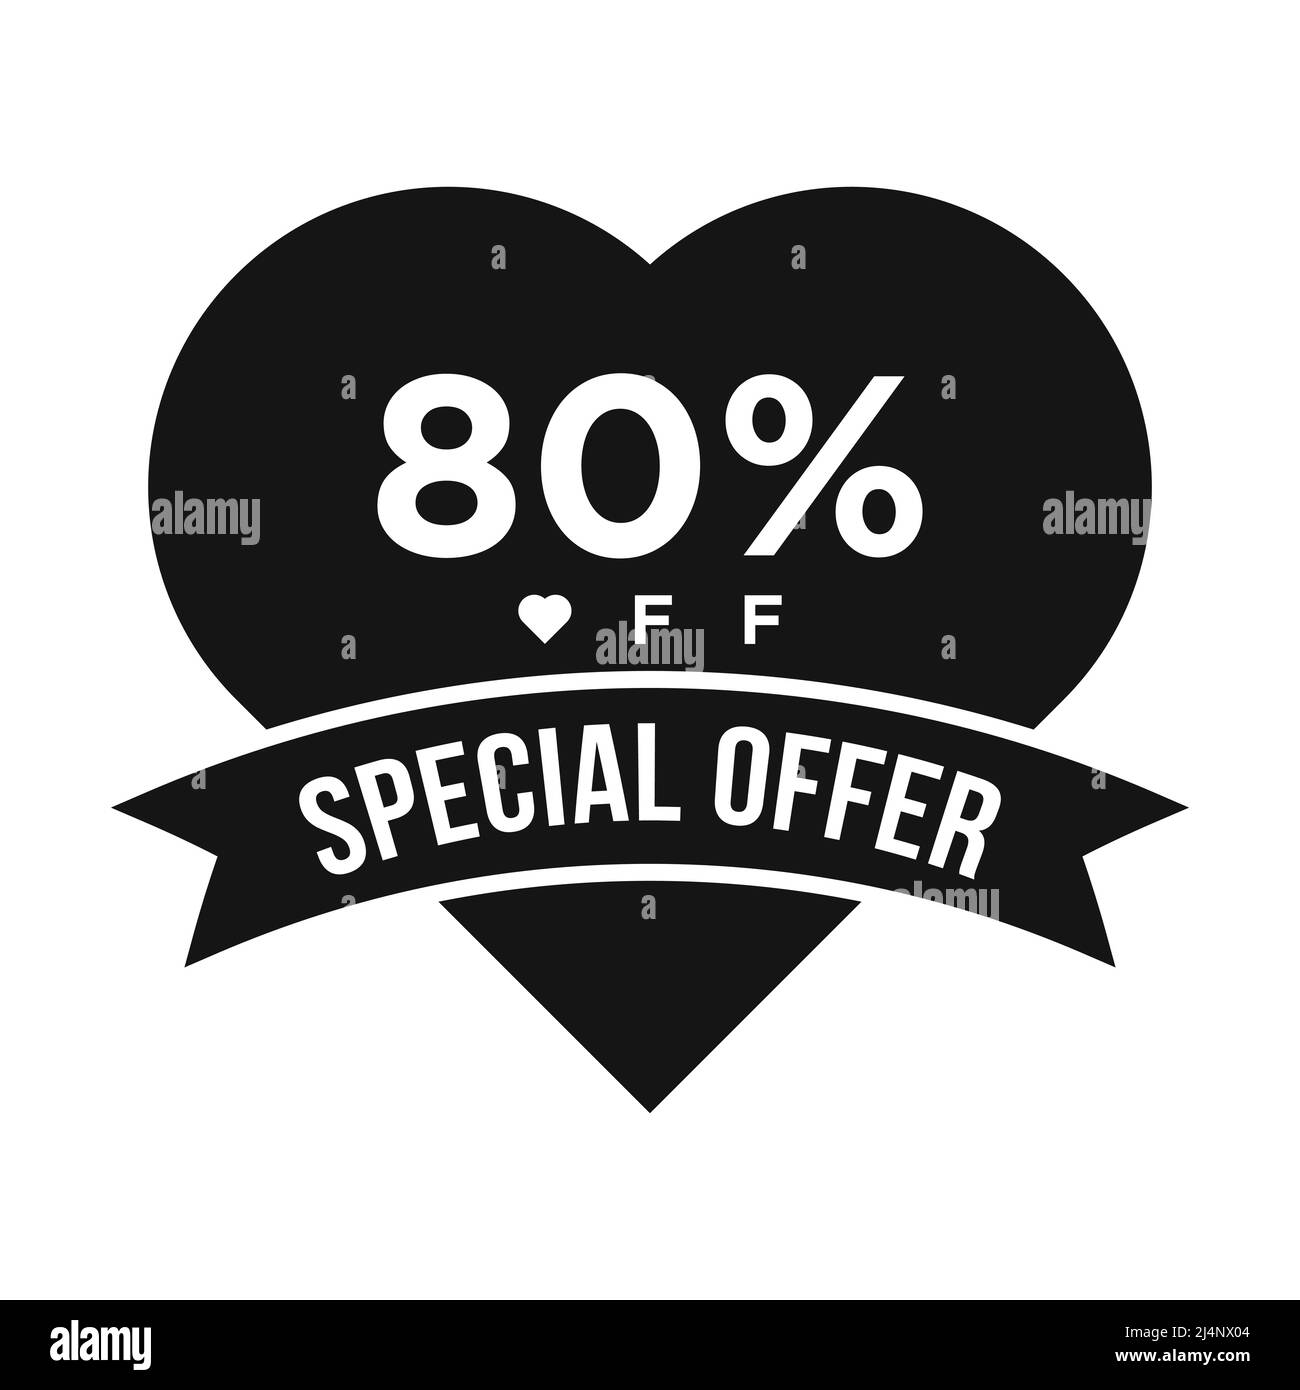 80% OFF Sale Discount Promotion Banner. Special Offer, Event, Valentine Day Sale, Holiday Discount Tag Vector Template Stock Vector